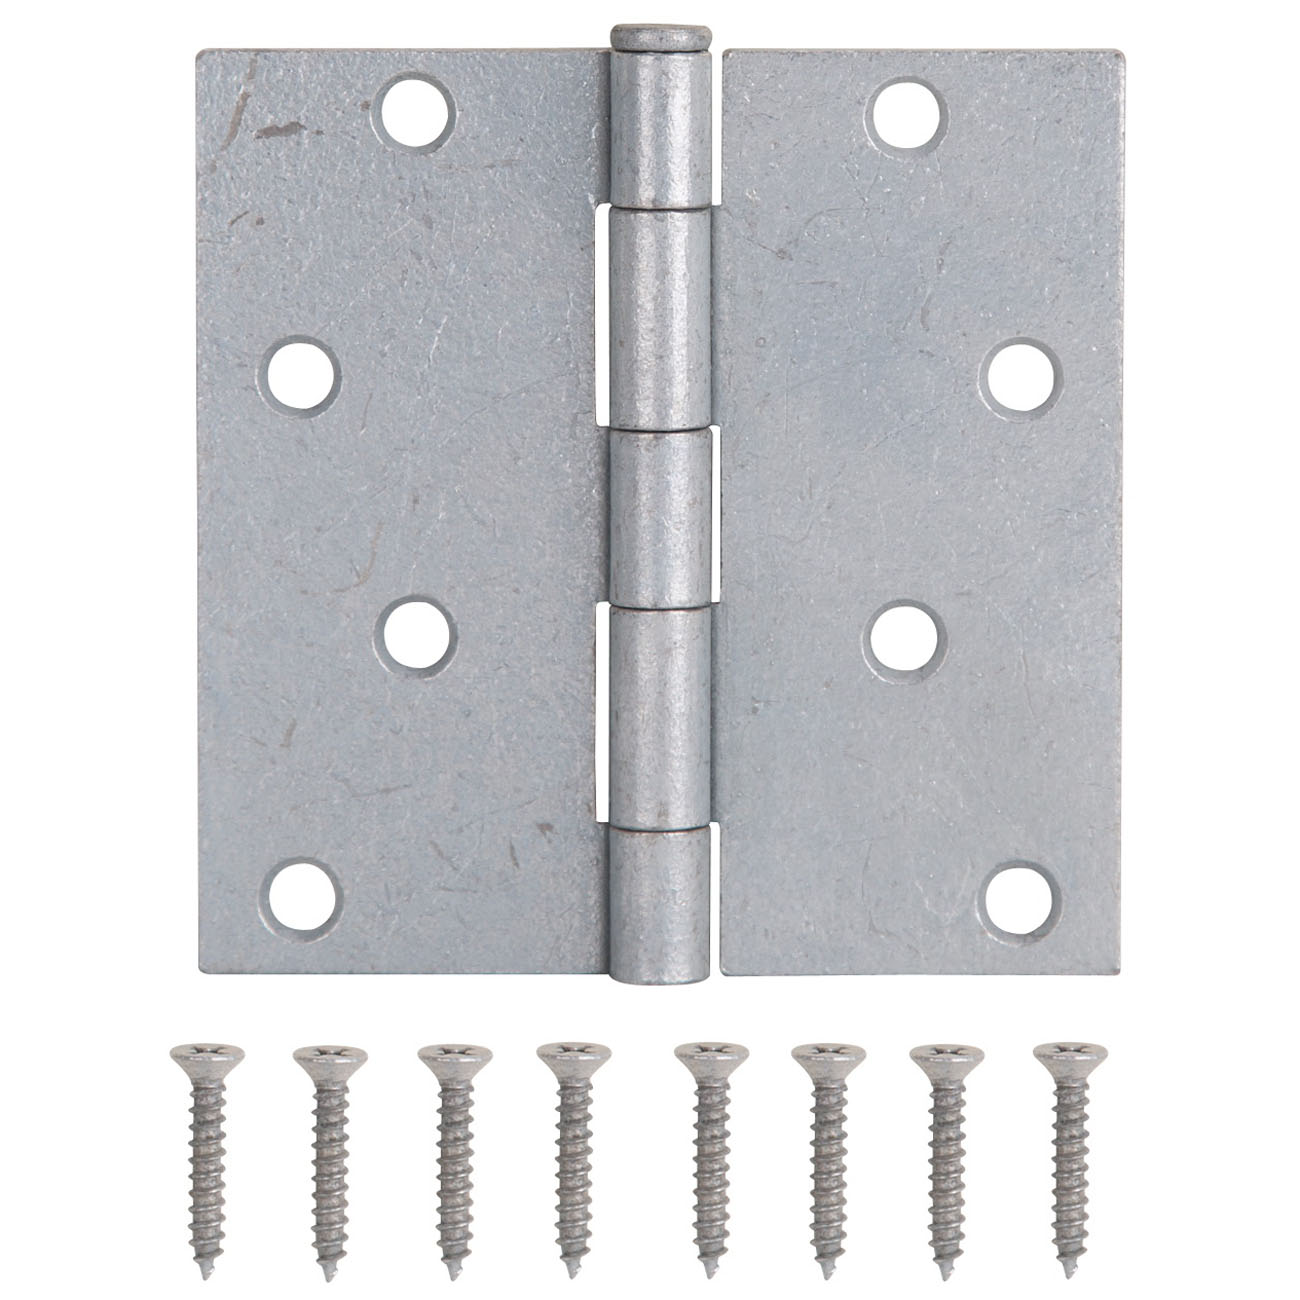 LR-046-PS Utility Hinge, Steel, Galvanized, Removable Pin, Full Mortise Mounting, 70 (Pair) lb